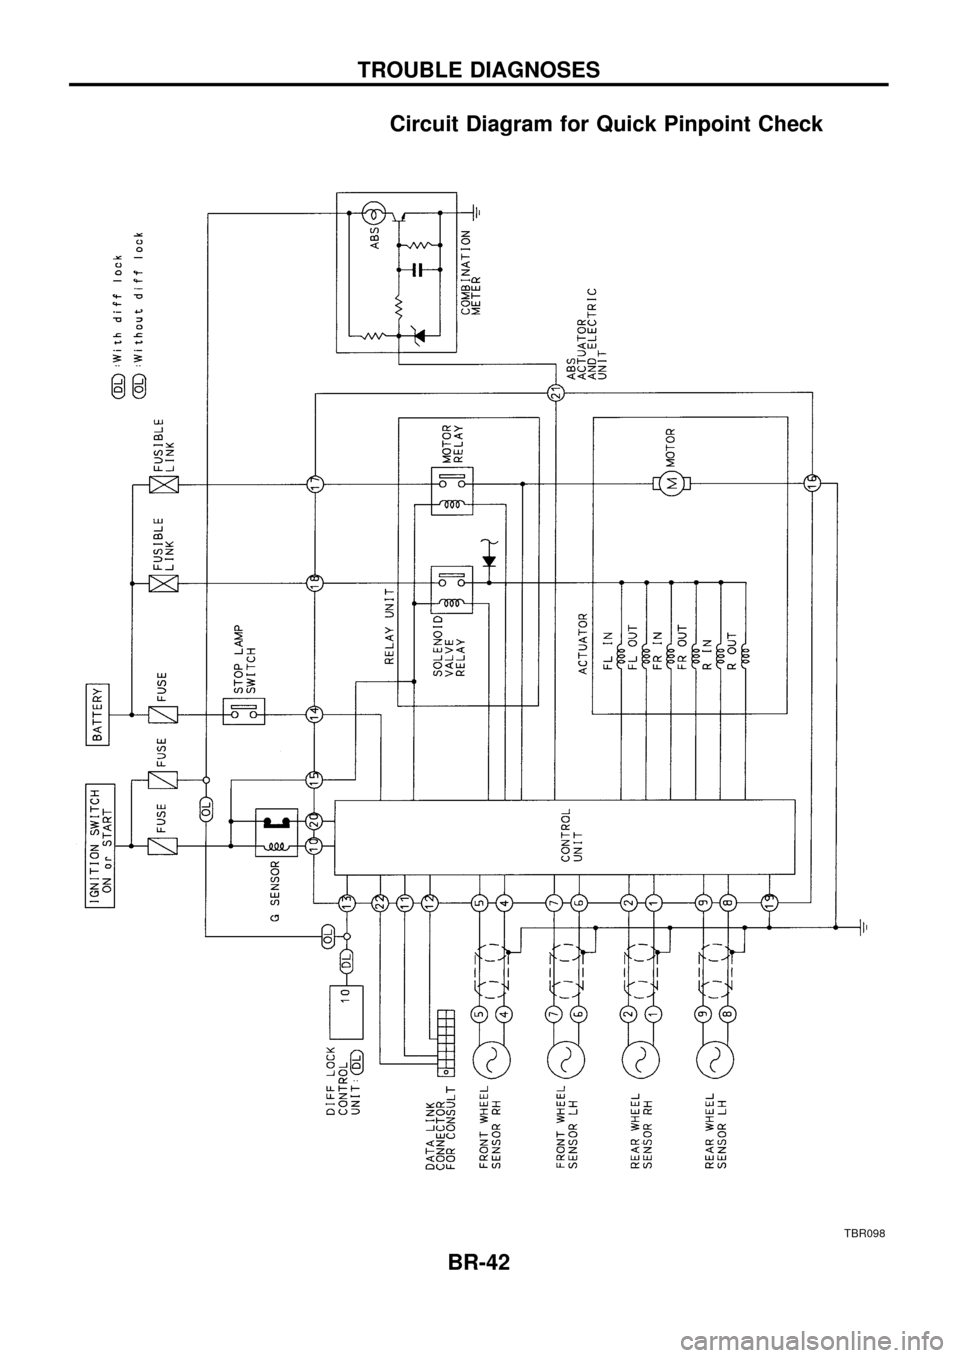 NISSAN PATROL 1998 Y61 / 5.G Brake System Service Manual Circuit Diagram for Quick Pinpoint Check
TBR098
TROUBLE DIAGNOSES
BR-42 